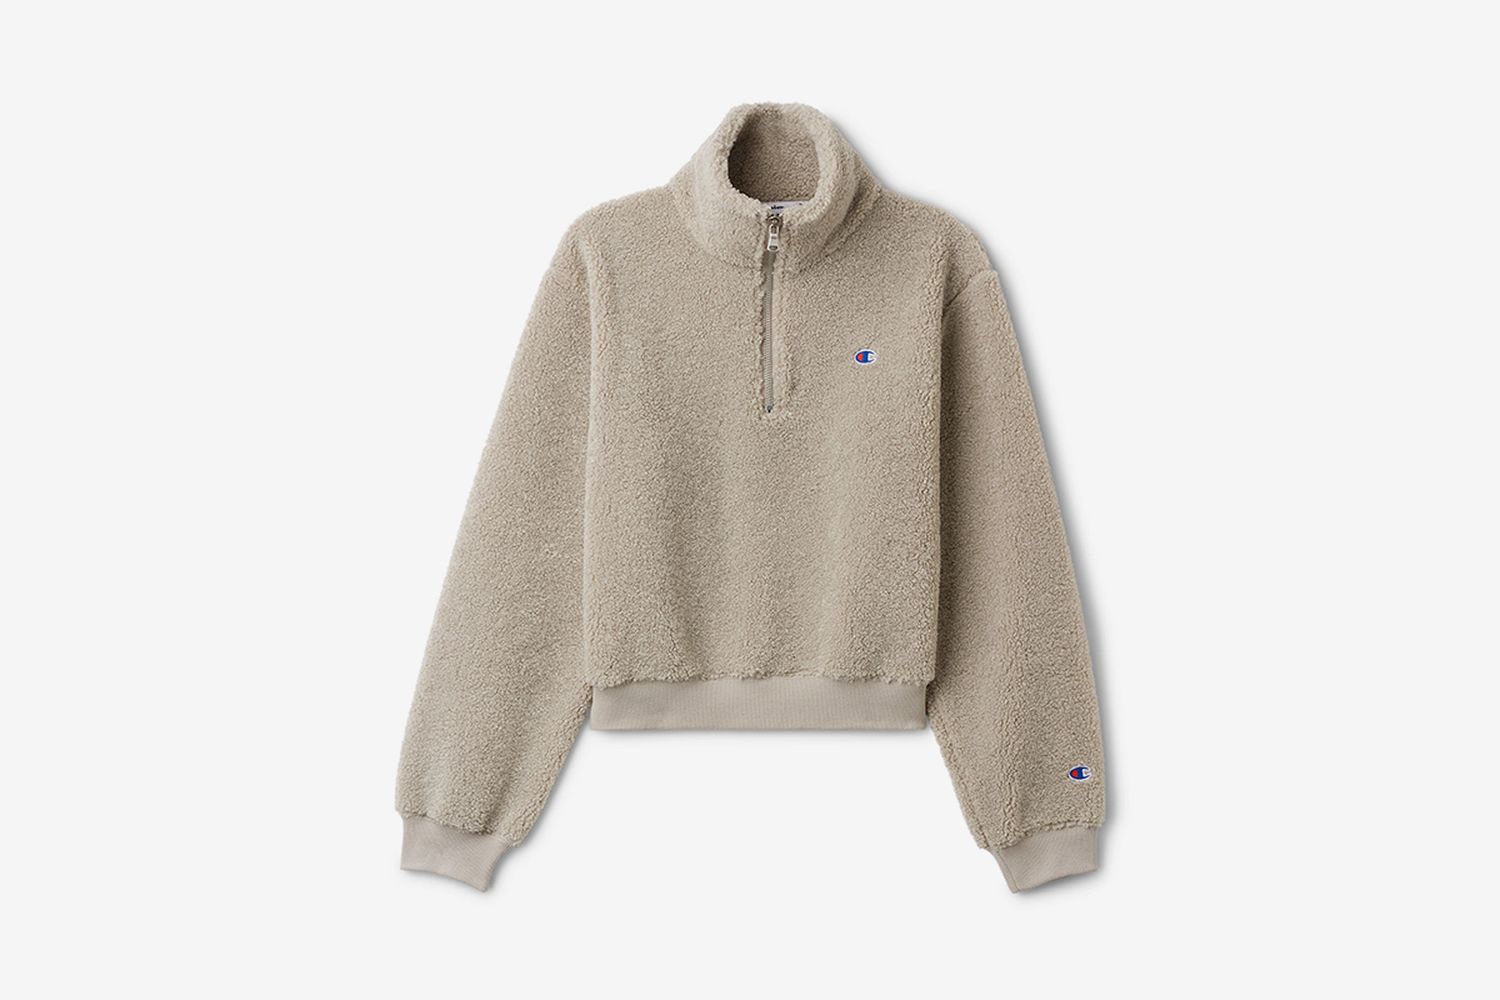 Weekday x Champion Now Available Buy